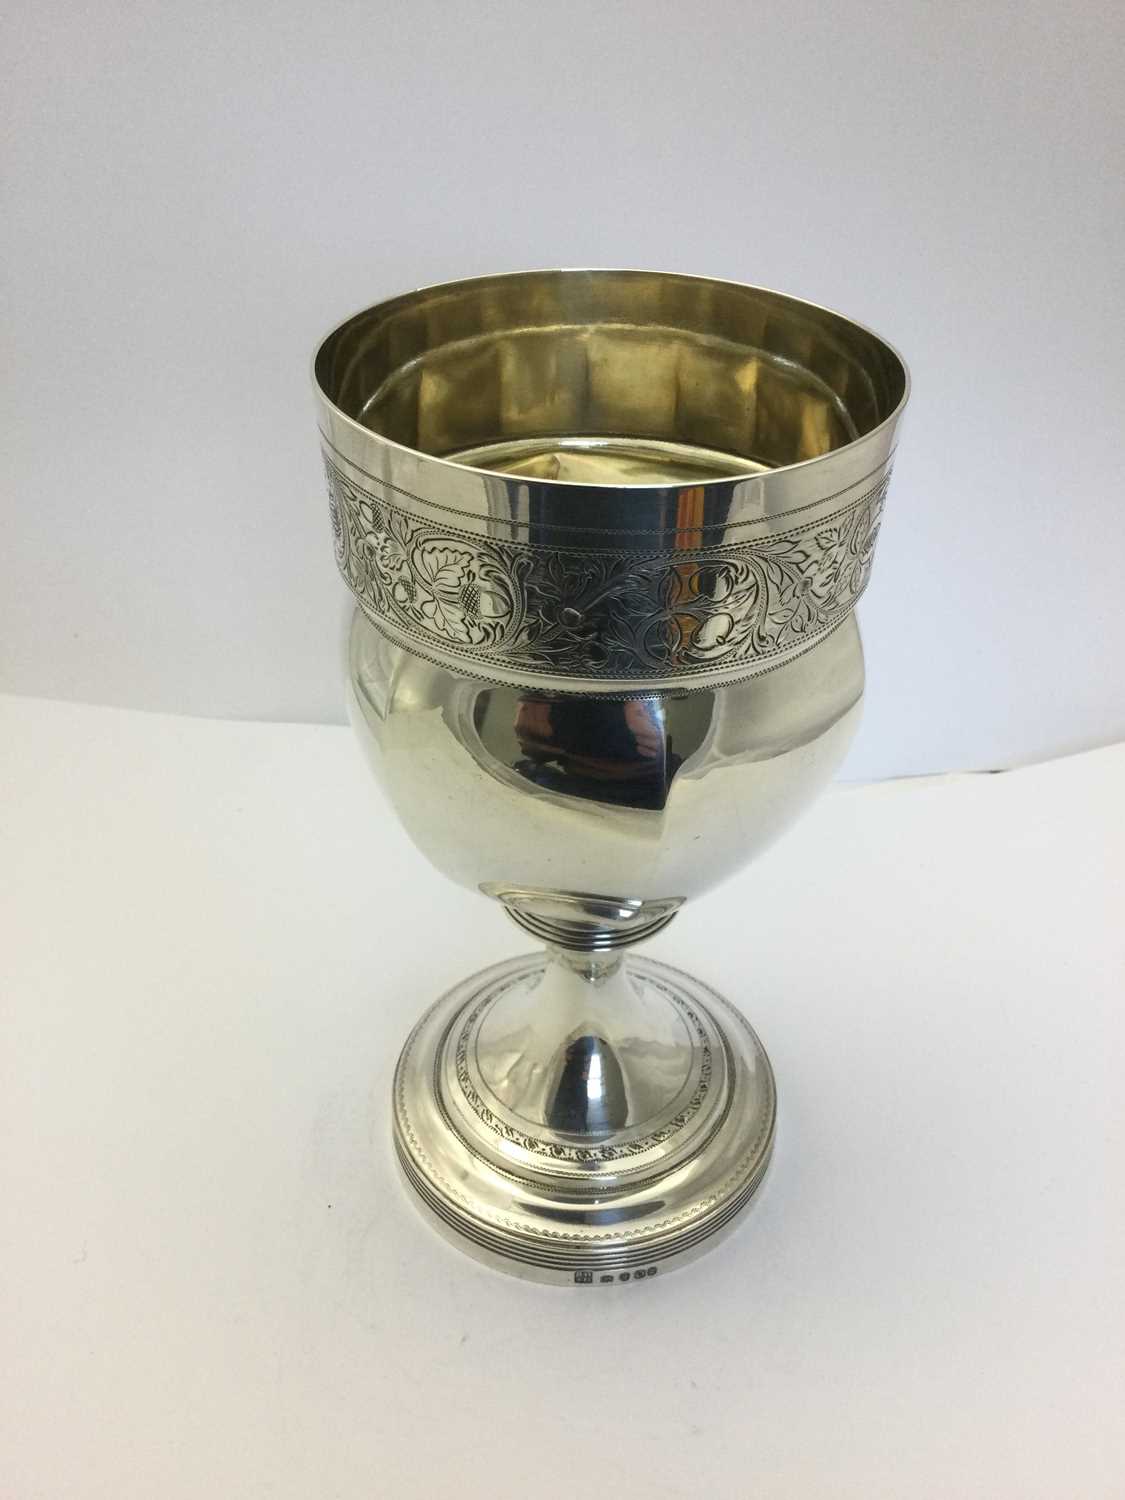 A George III Silver Goblet, by Robert Hennell and Samuel Hennell, London, 1809 - Image 3 of 7